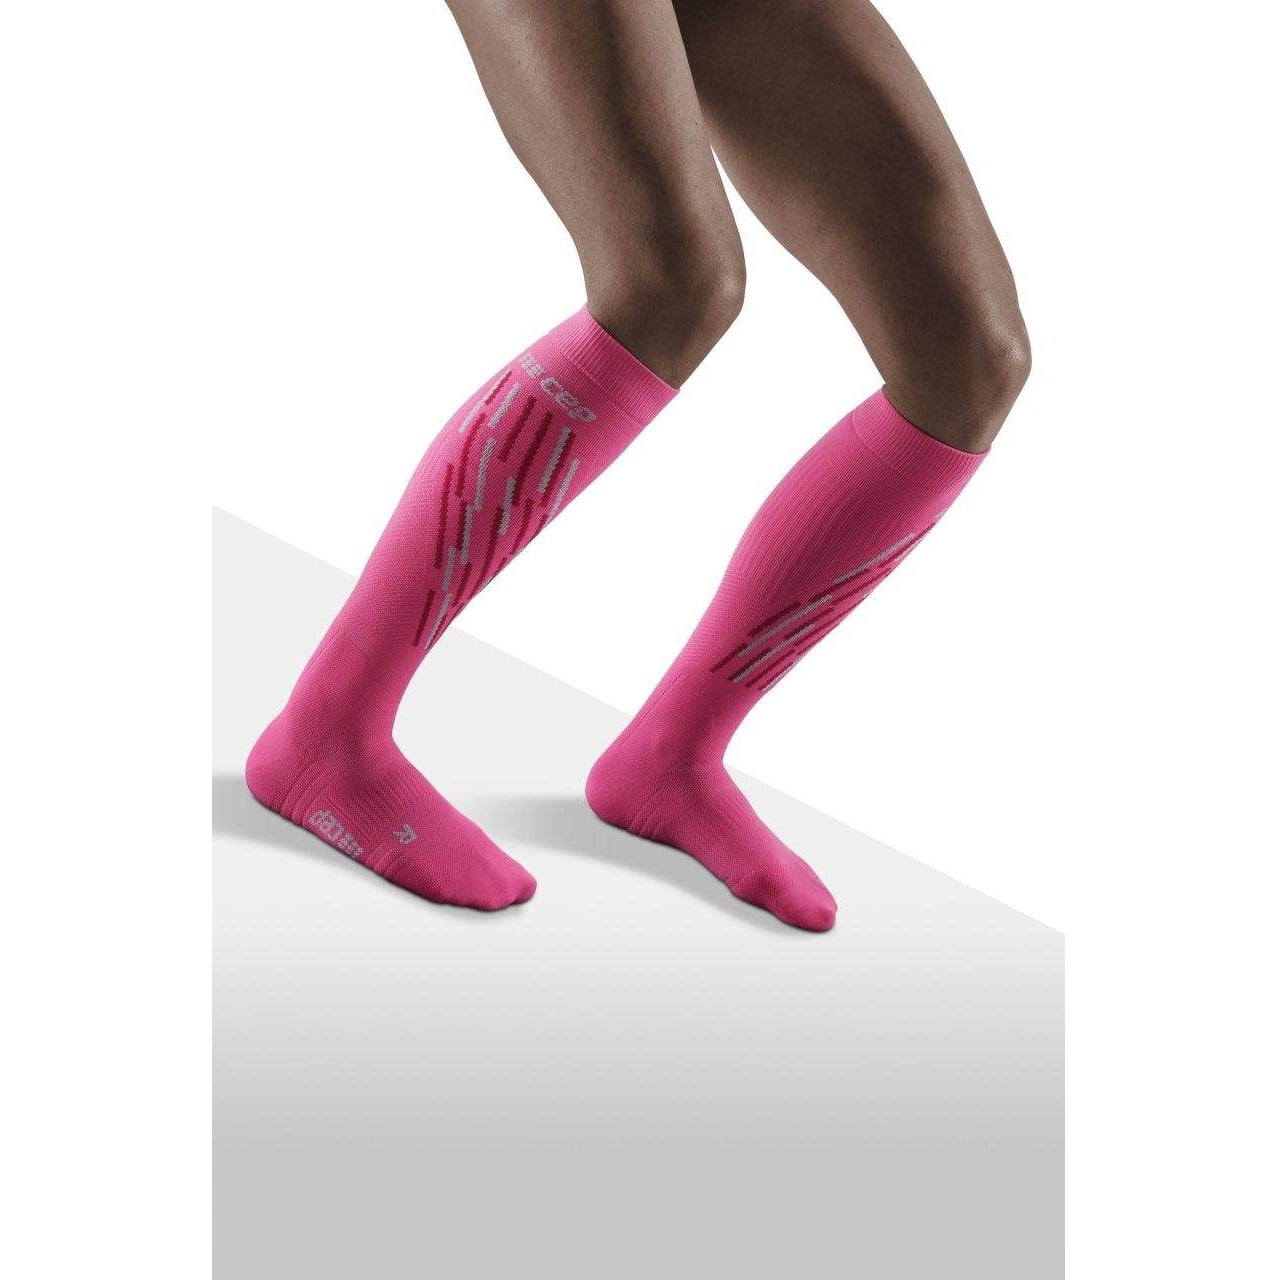 Circaid Cotton Terry Knee-High Sock Liner Undersock